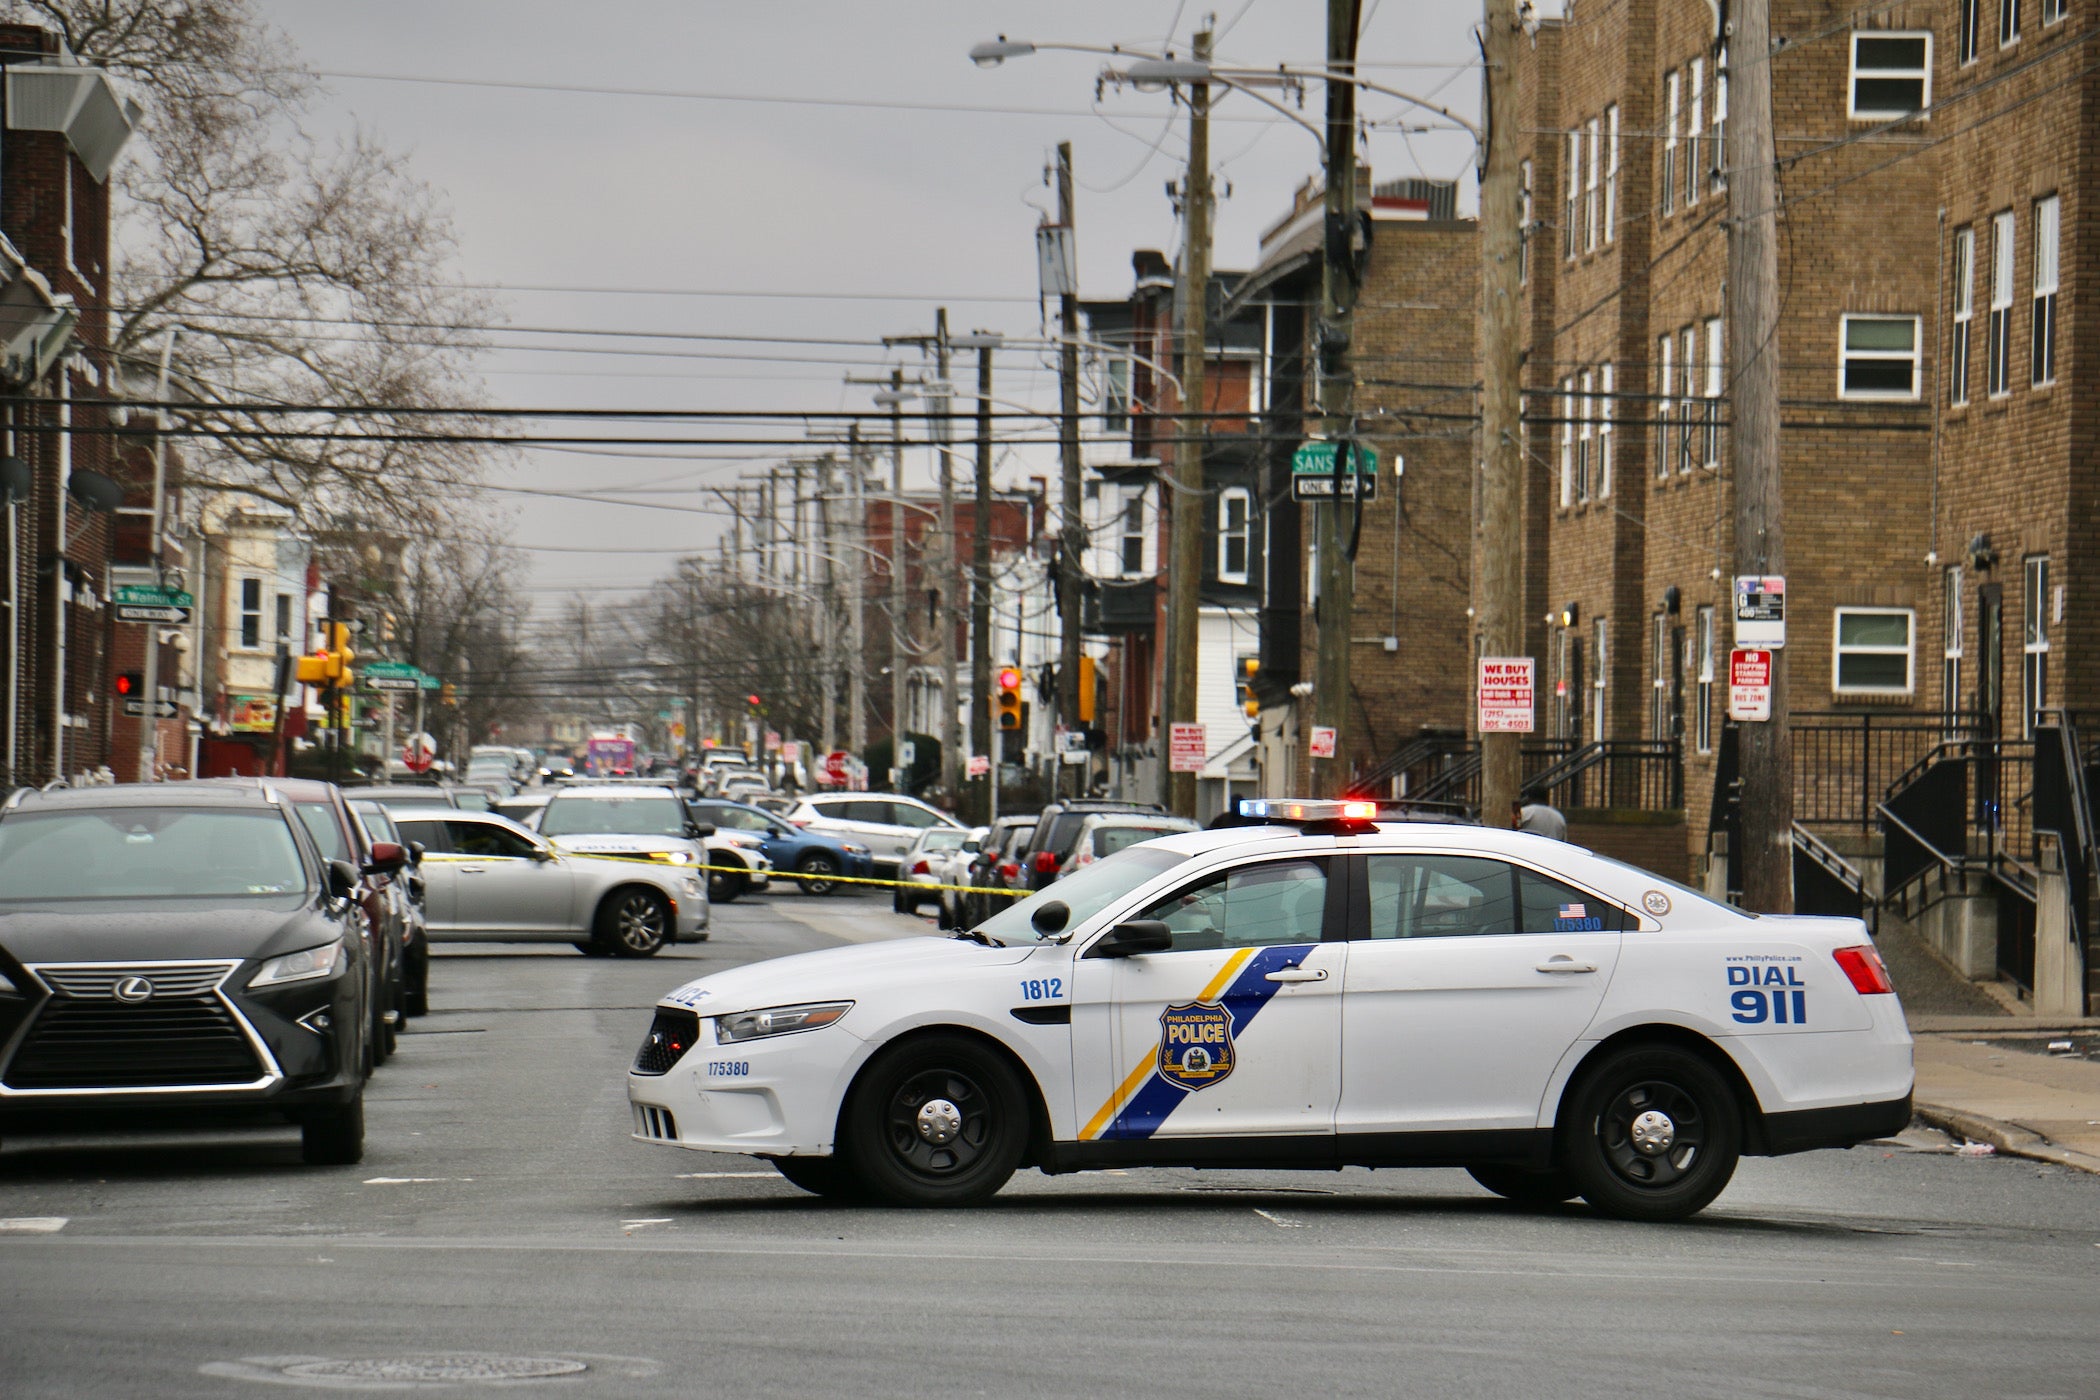 A police car parked in the middle of the road with a crime scene in the background.